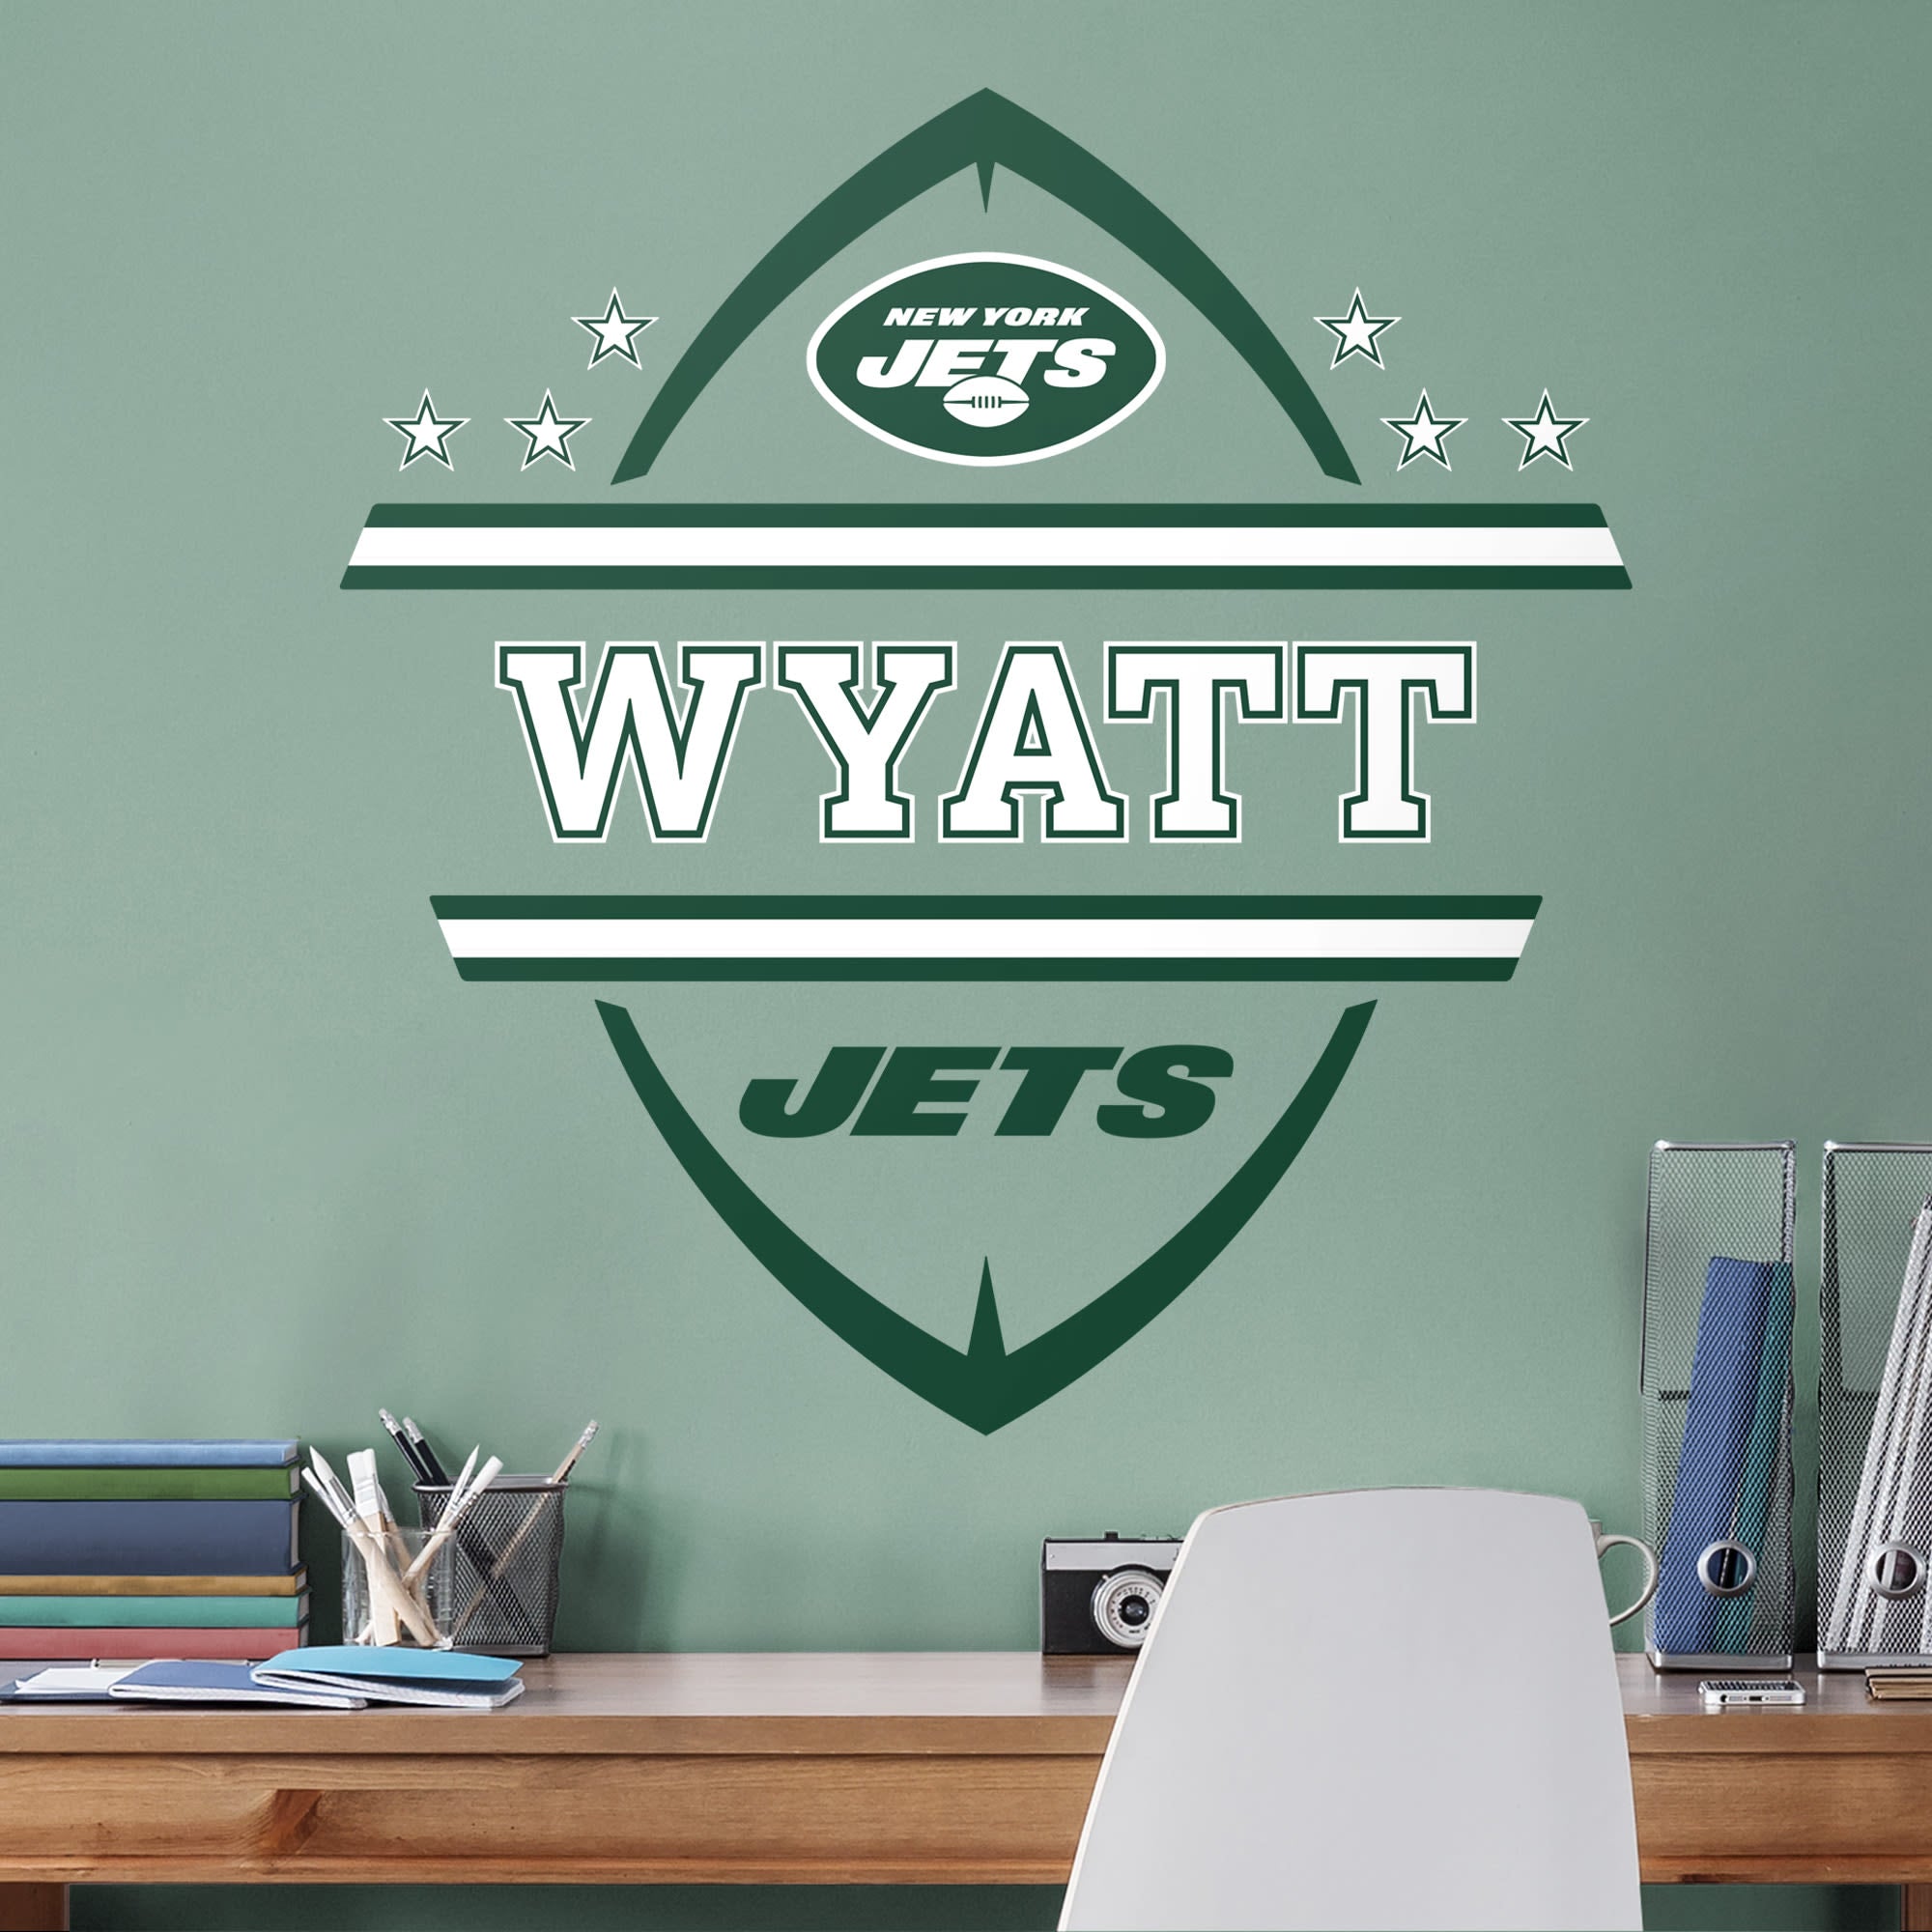 New York Jets: Personalized Name - Officially Licensed NFL Transfer Decal 51.0"W x 38.0"H by Fathead | Vinyl